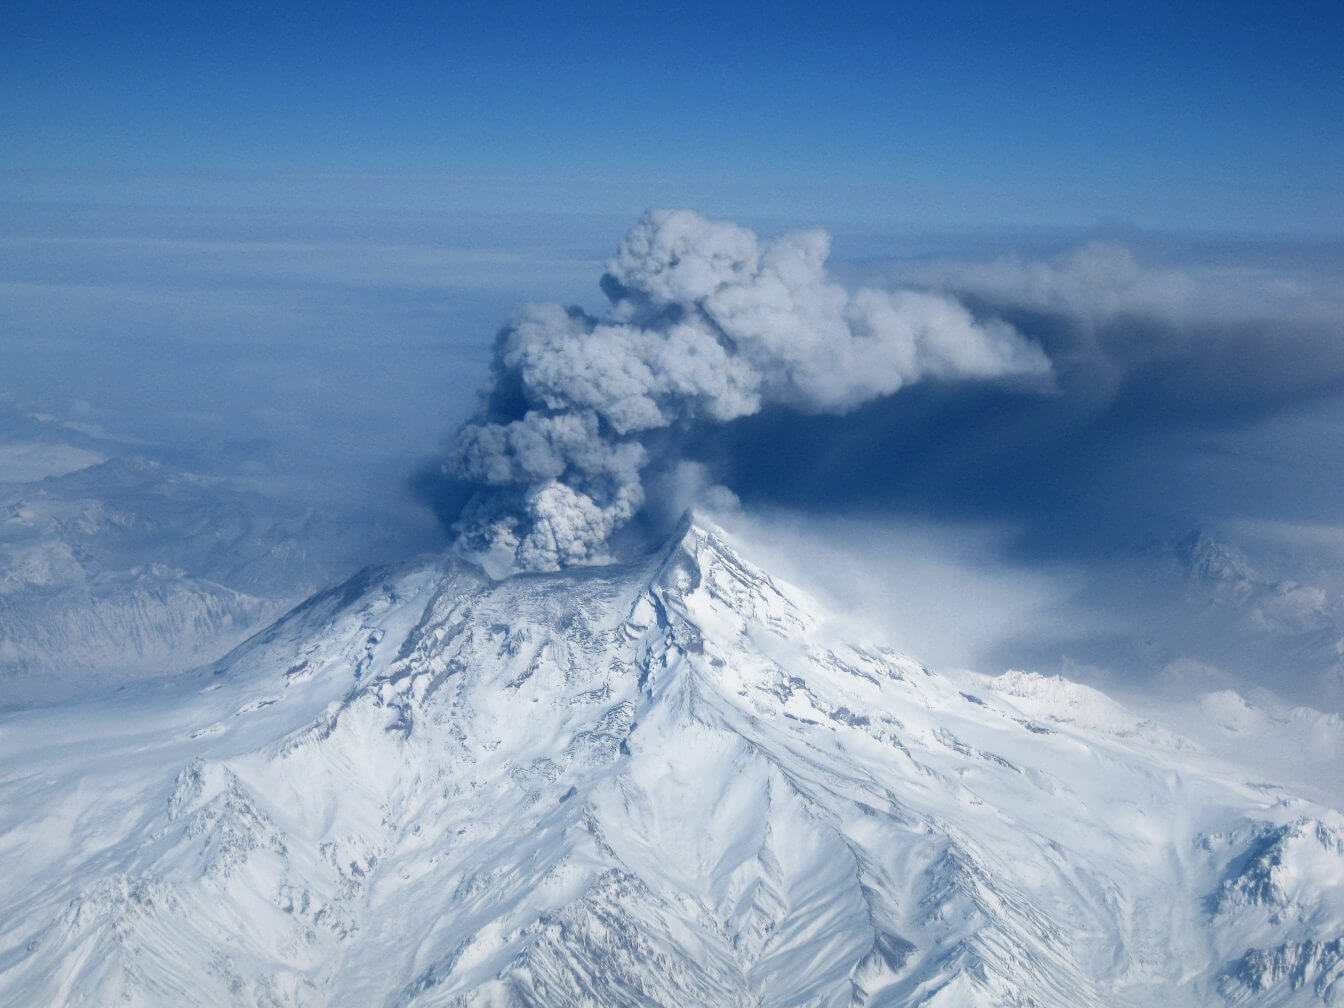 HONORABLE MENTION – Alaska Scenery “Volcano Redoubt” by Jeff B.